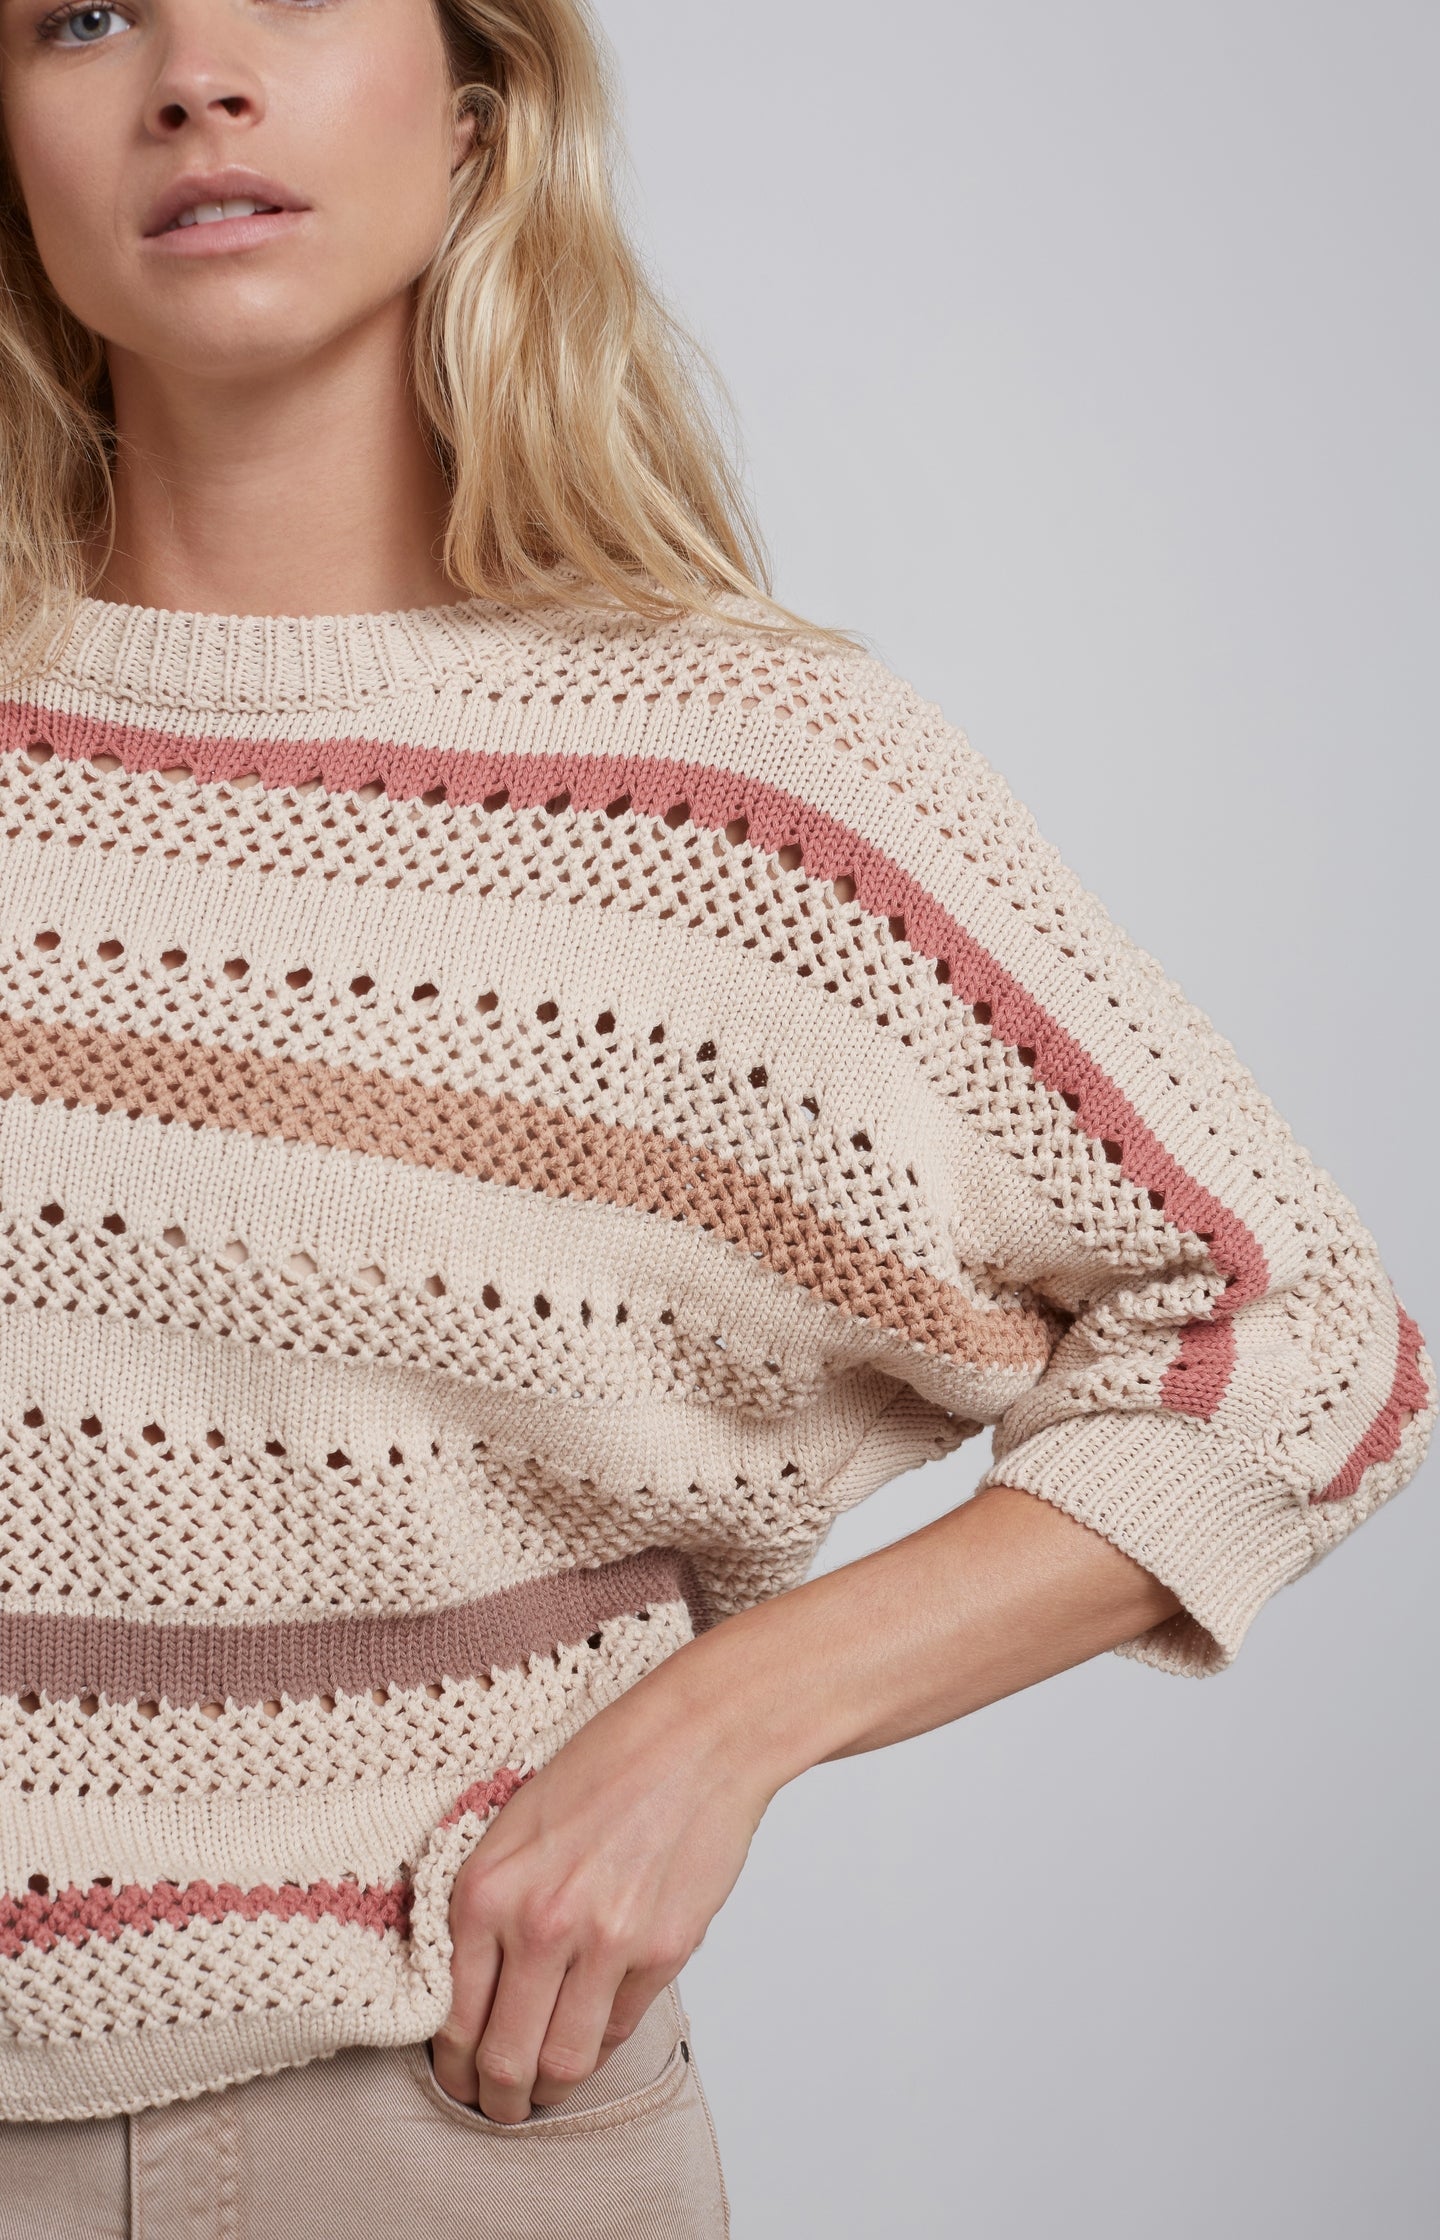 Textured sweater with stripes, round neck and 7/8 sleeves